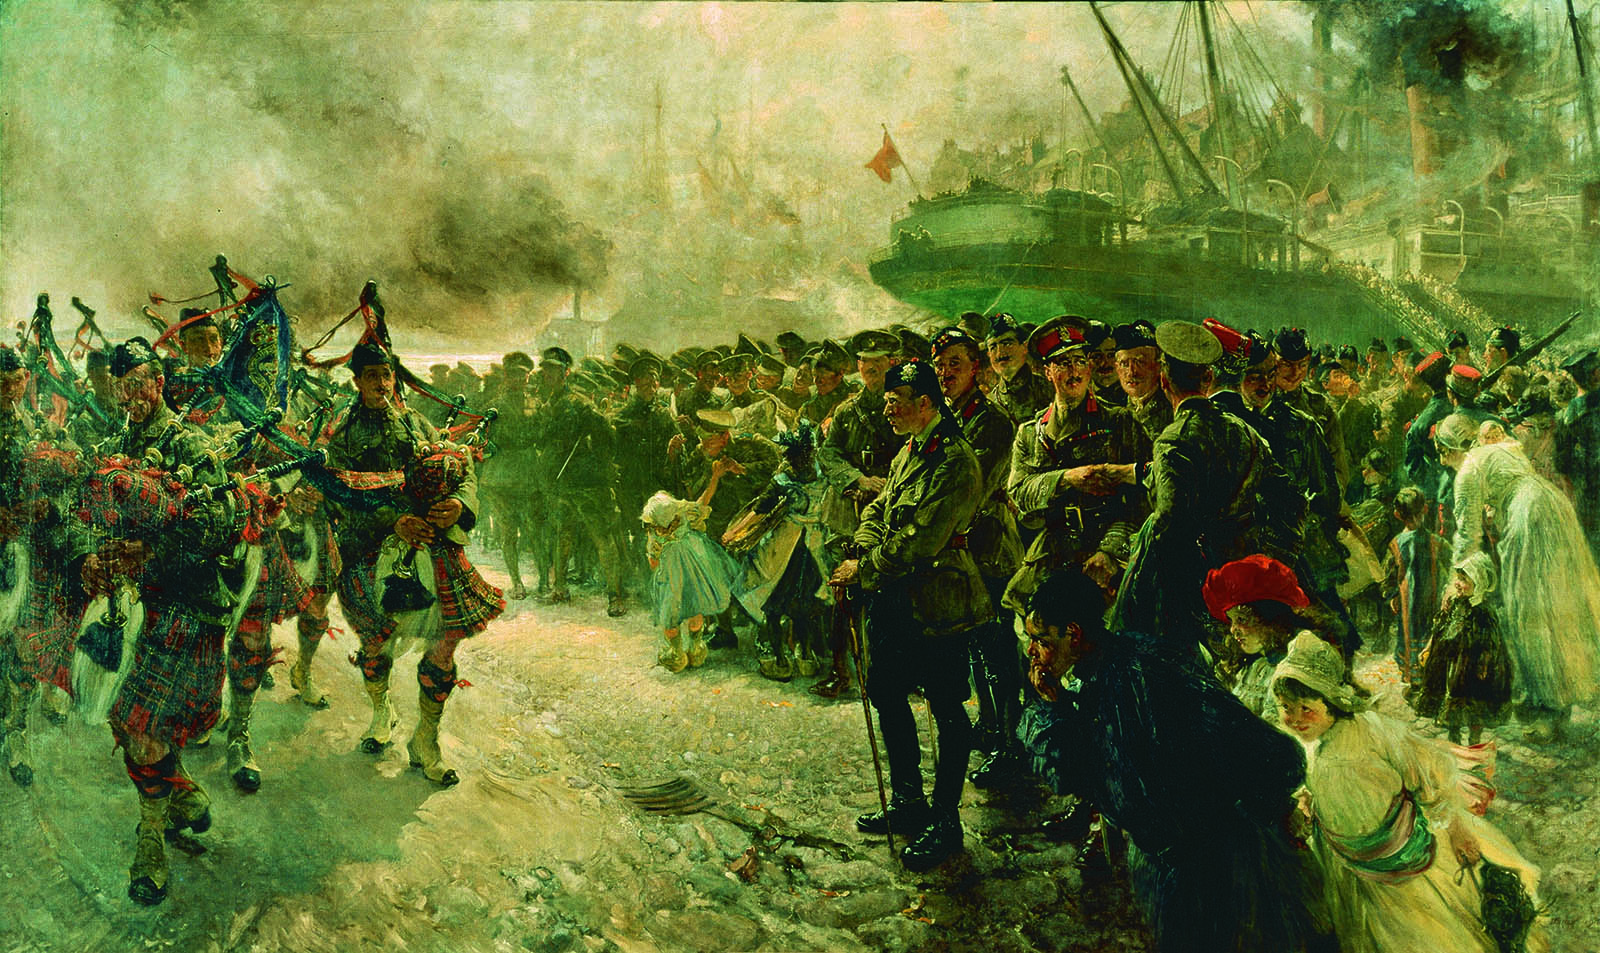 Edgar Bundy portrayed the moment Canadian troops first set foot on the European continent. The First Canadian Division, led by the Royal Highland Regiment pipe band, marches by the cheering residents of Saint-Nazaire, France and on to the Western Front. (Beaverbrook Collection of War Art, Canadian War Museum, CWM 19710261-0110)